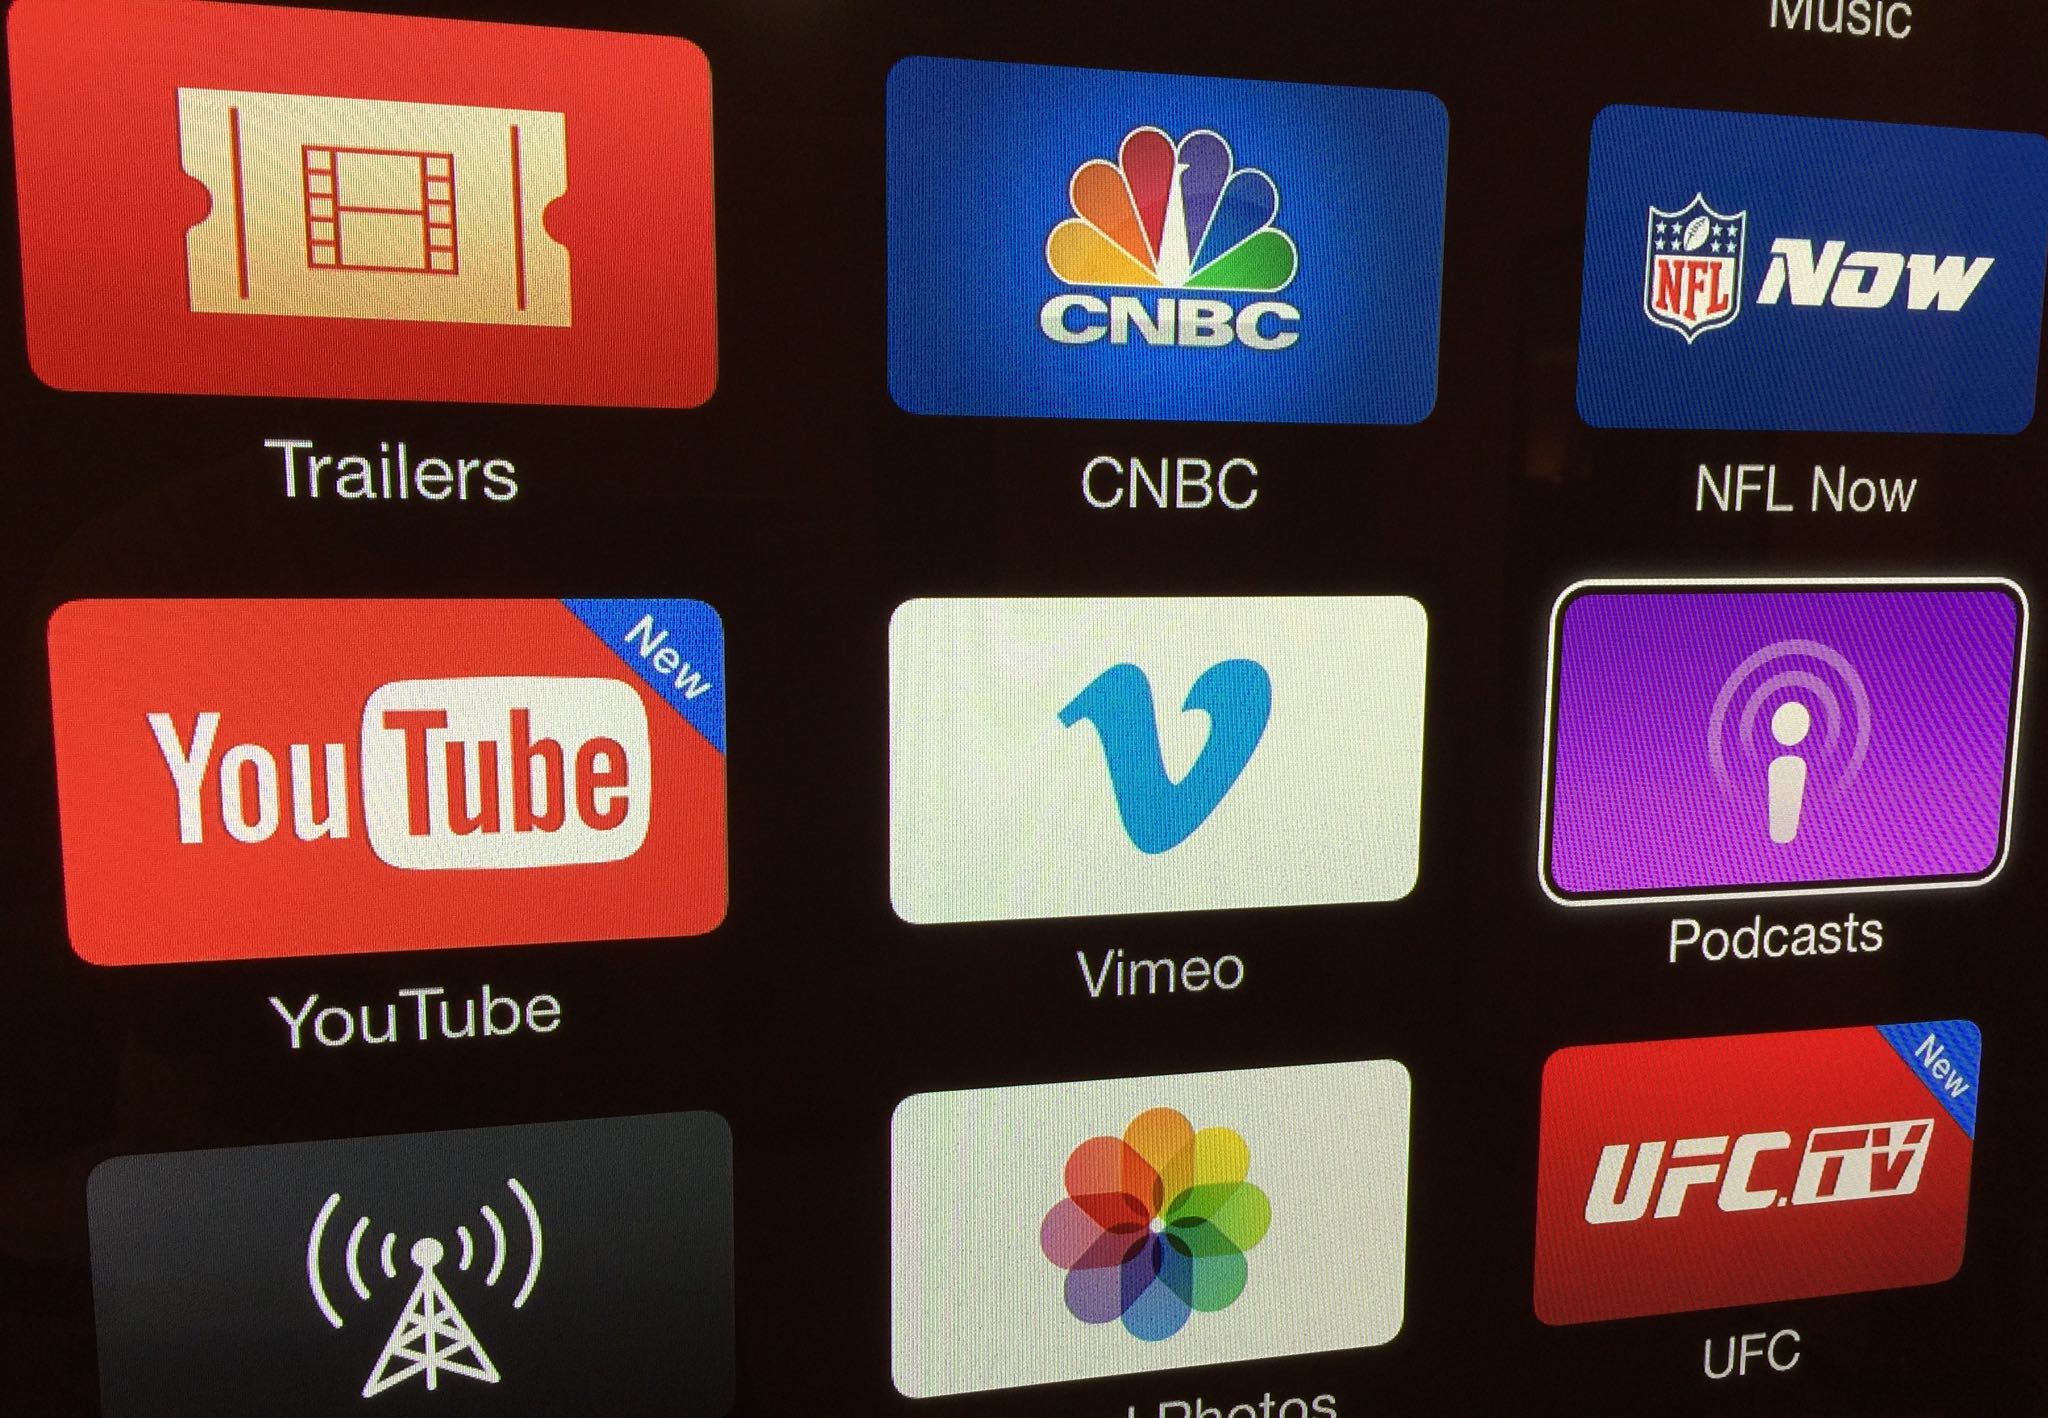 Apple TV gains revamped YouTube app with ads, Dailymotion and other new channels2048 x 1418